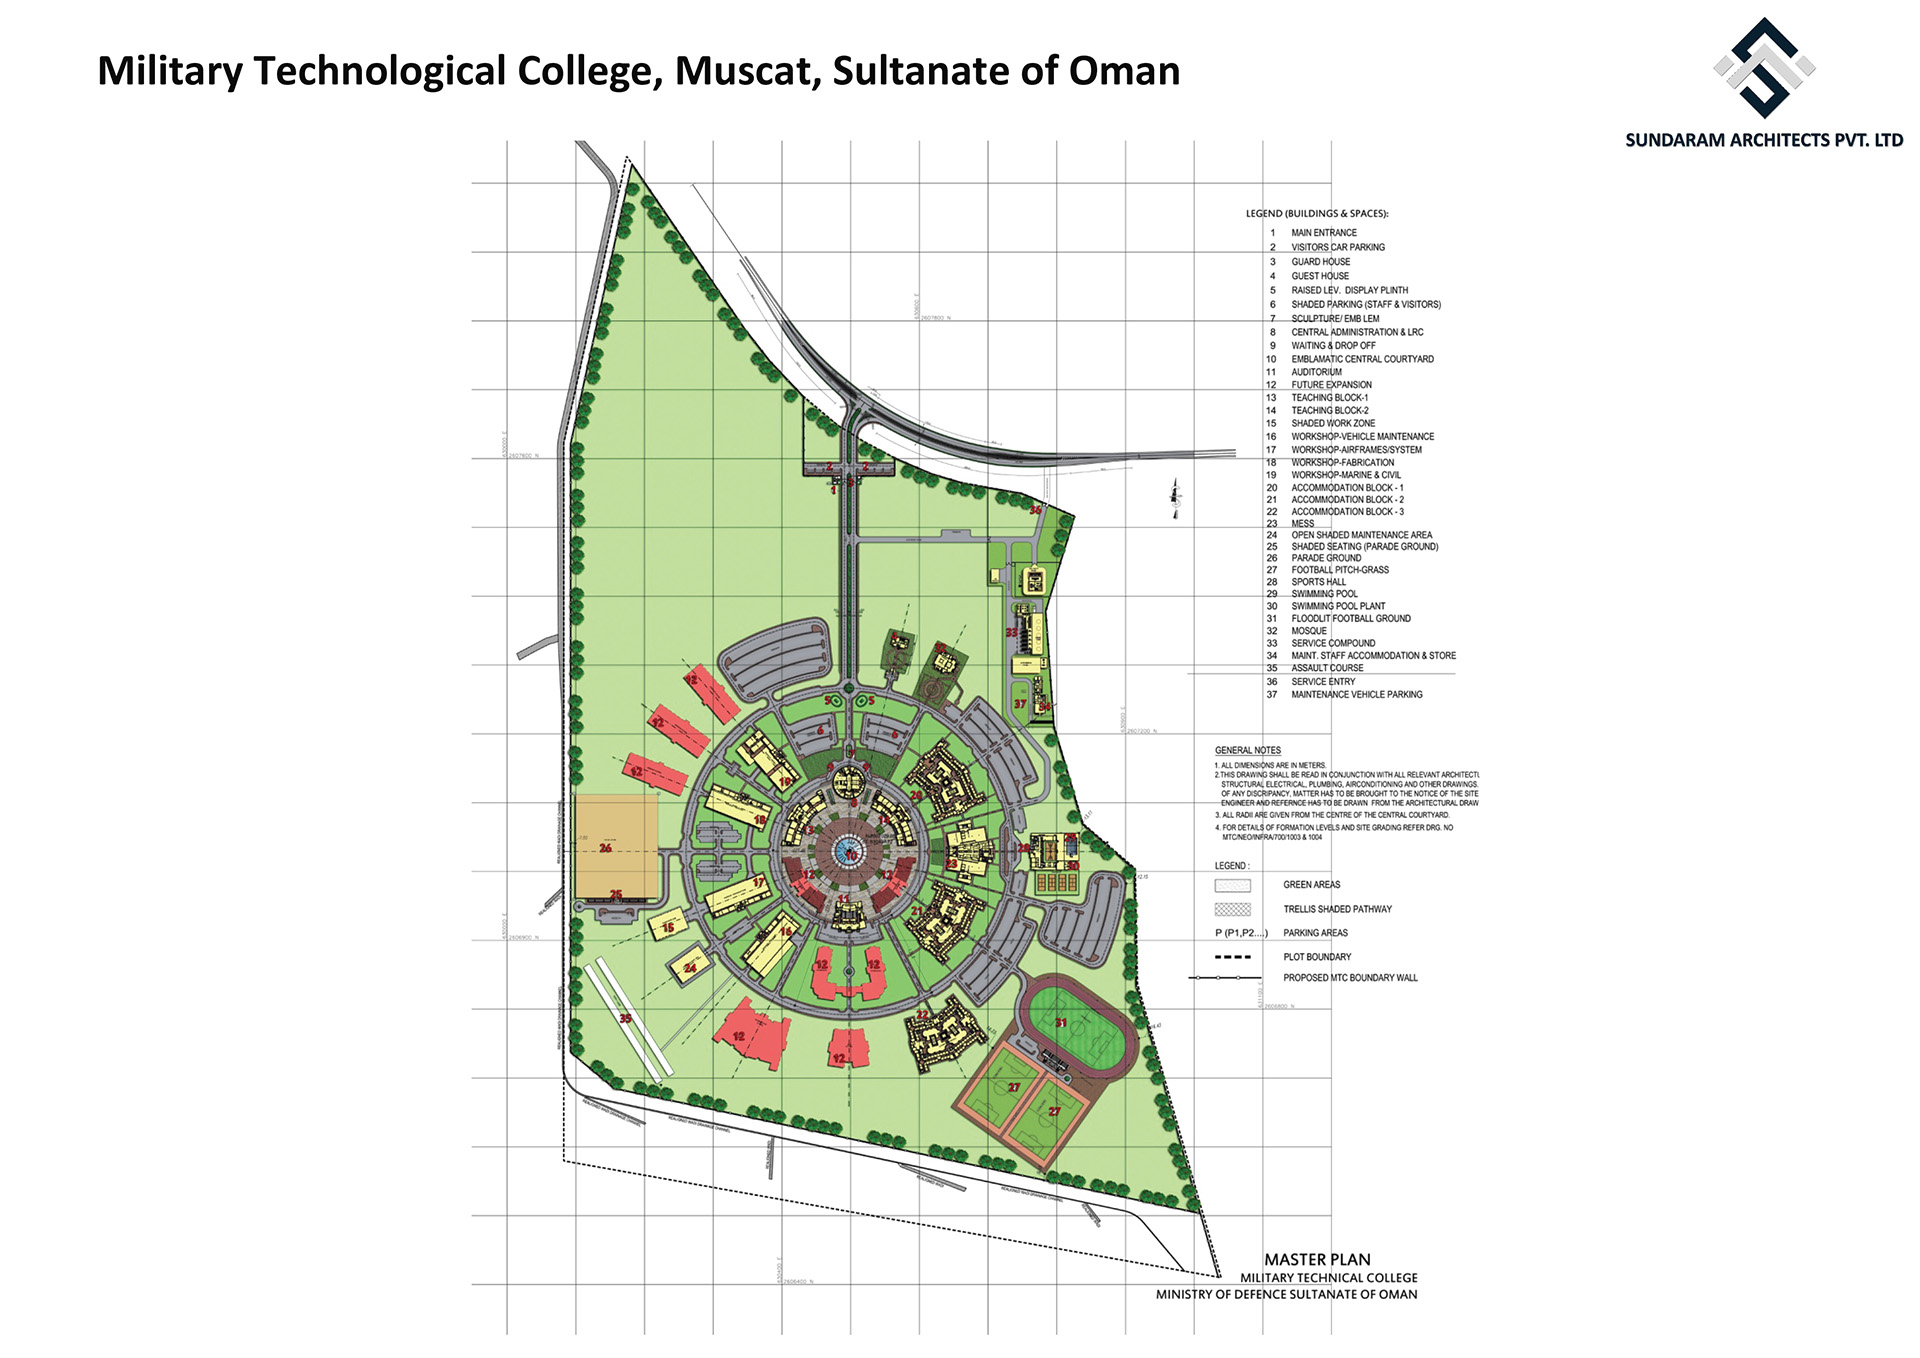 Military Technological College, Muscat, Sultanate of Oman - Master Planning & Infrastructure Design - Smart and Sustainable Urban Design